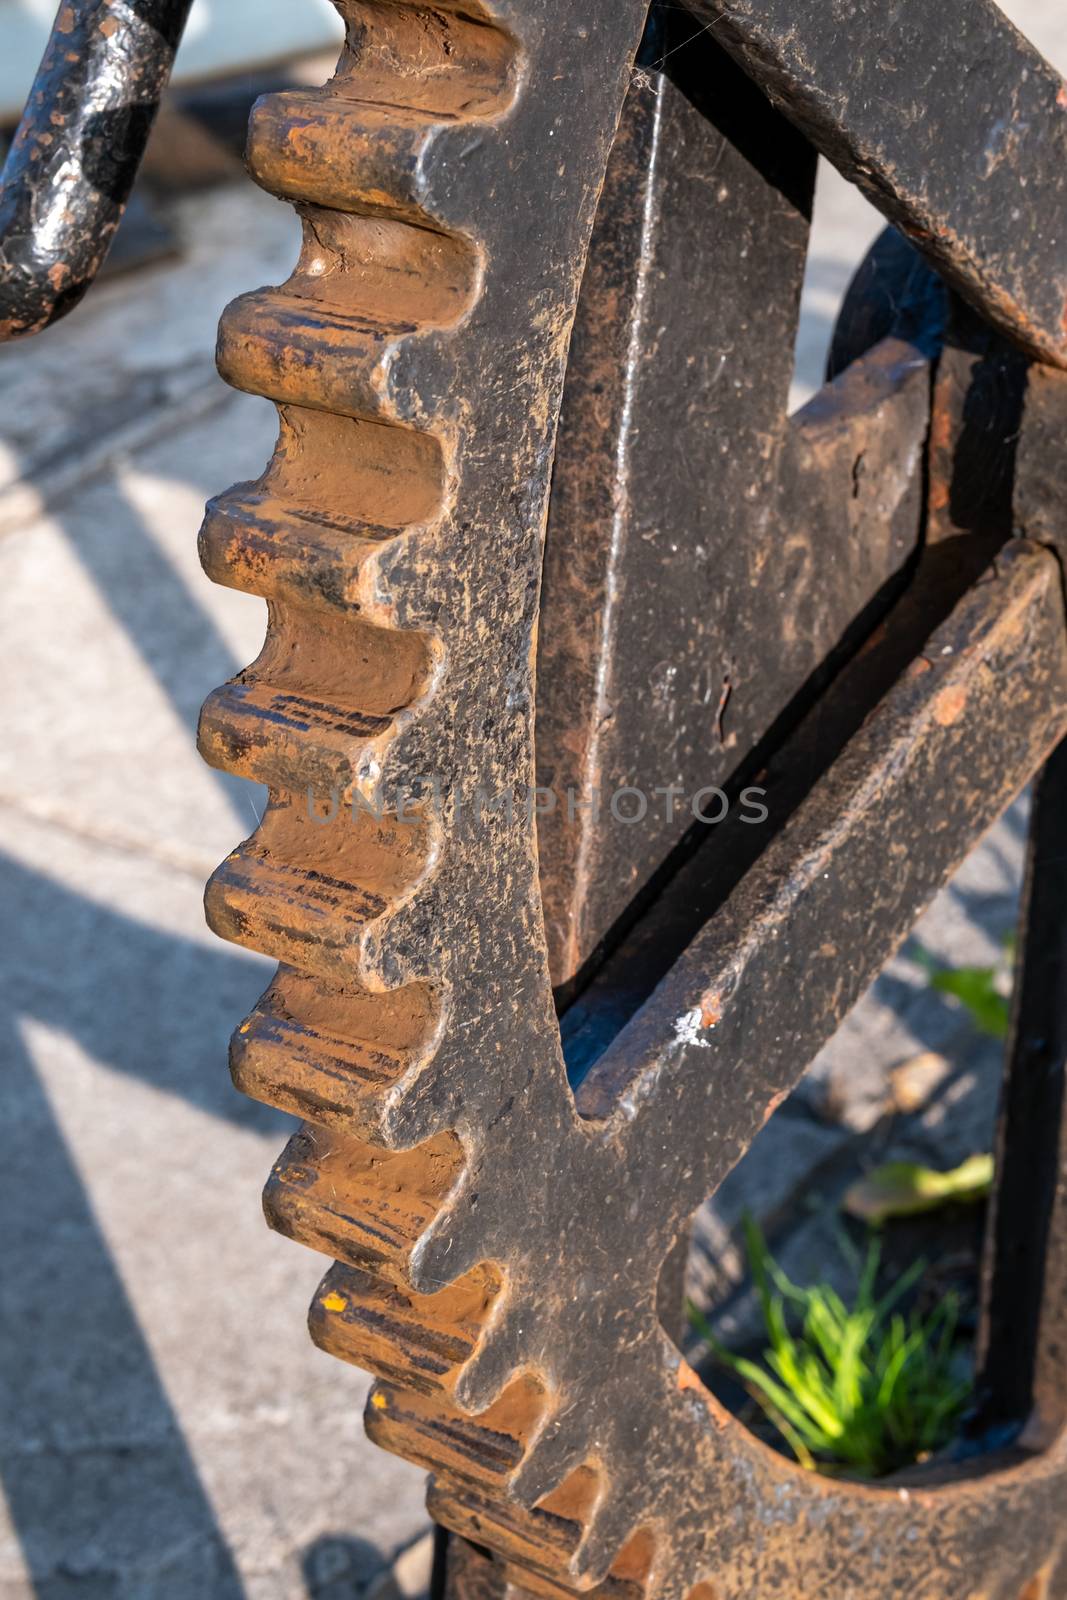 Large iron gear cog with rusting edges by colintemple